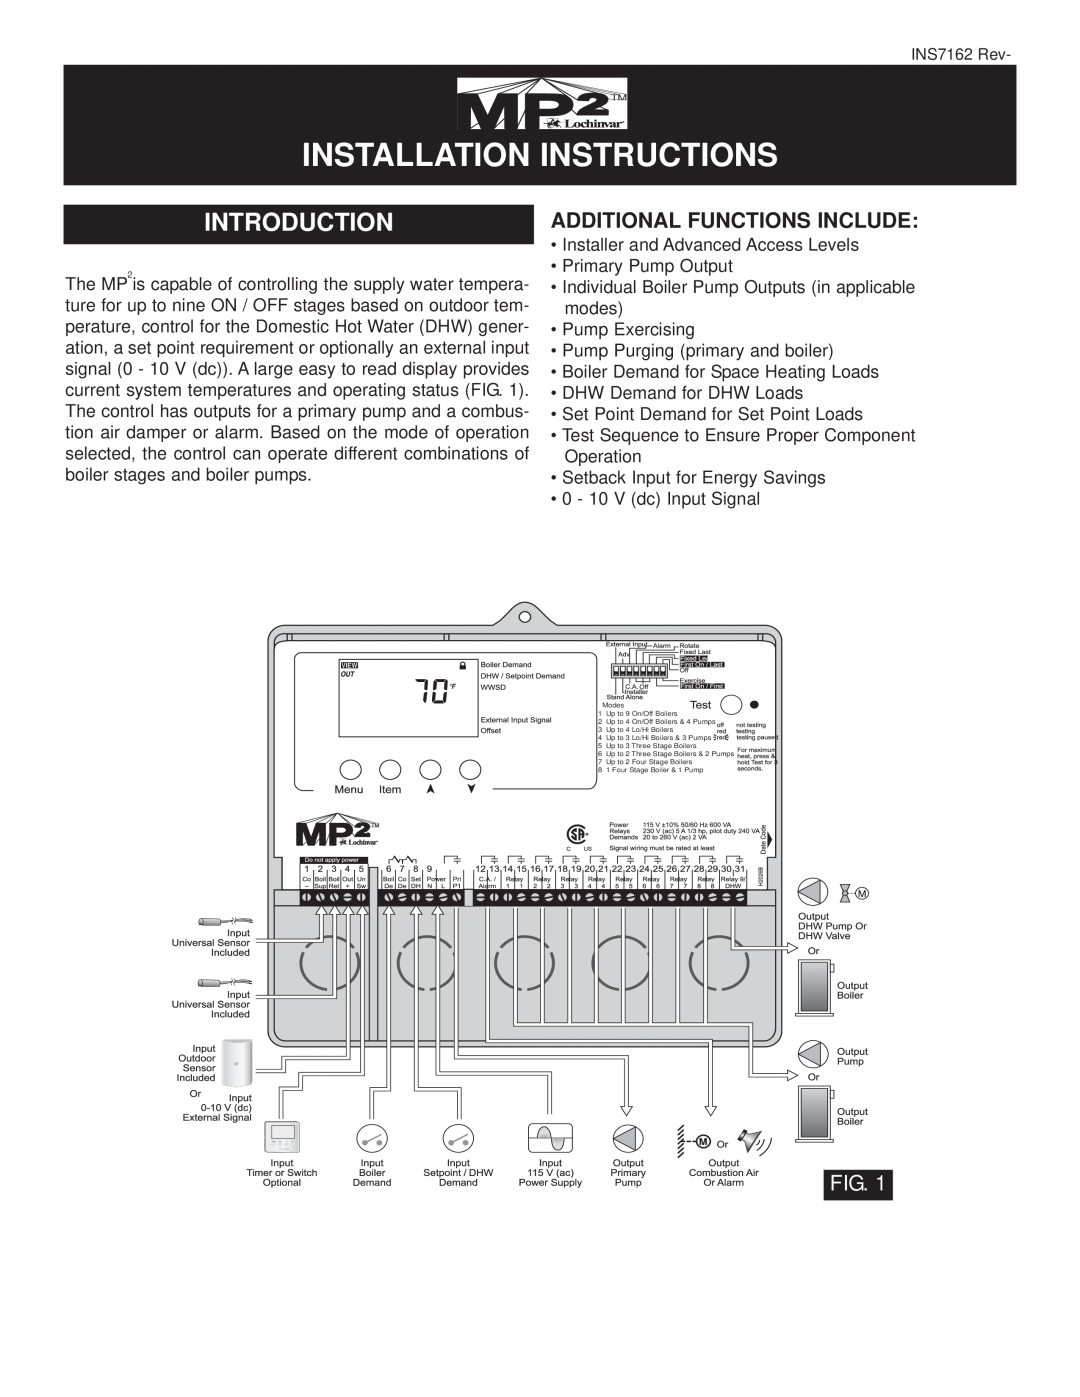 Lochinvar INS7141, MP2 installation instructions Introduction, Additional Functions Include, Installation Instructions 